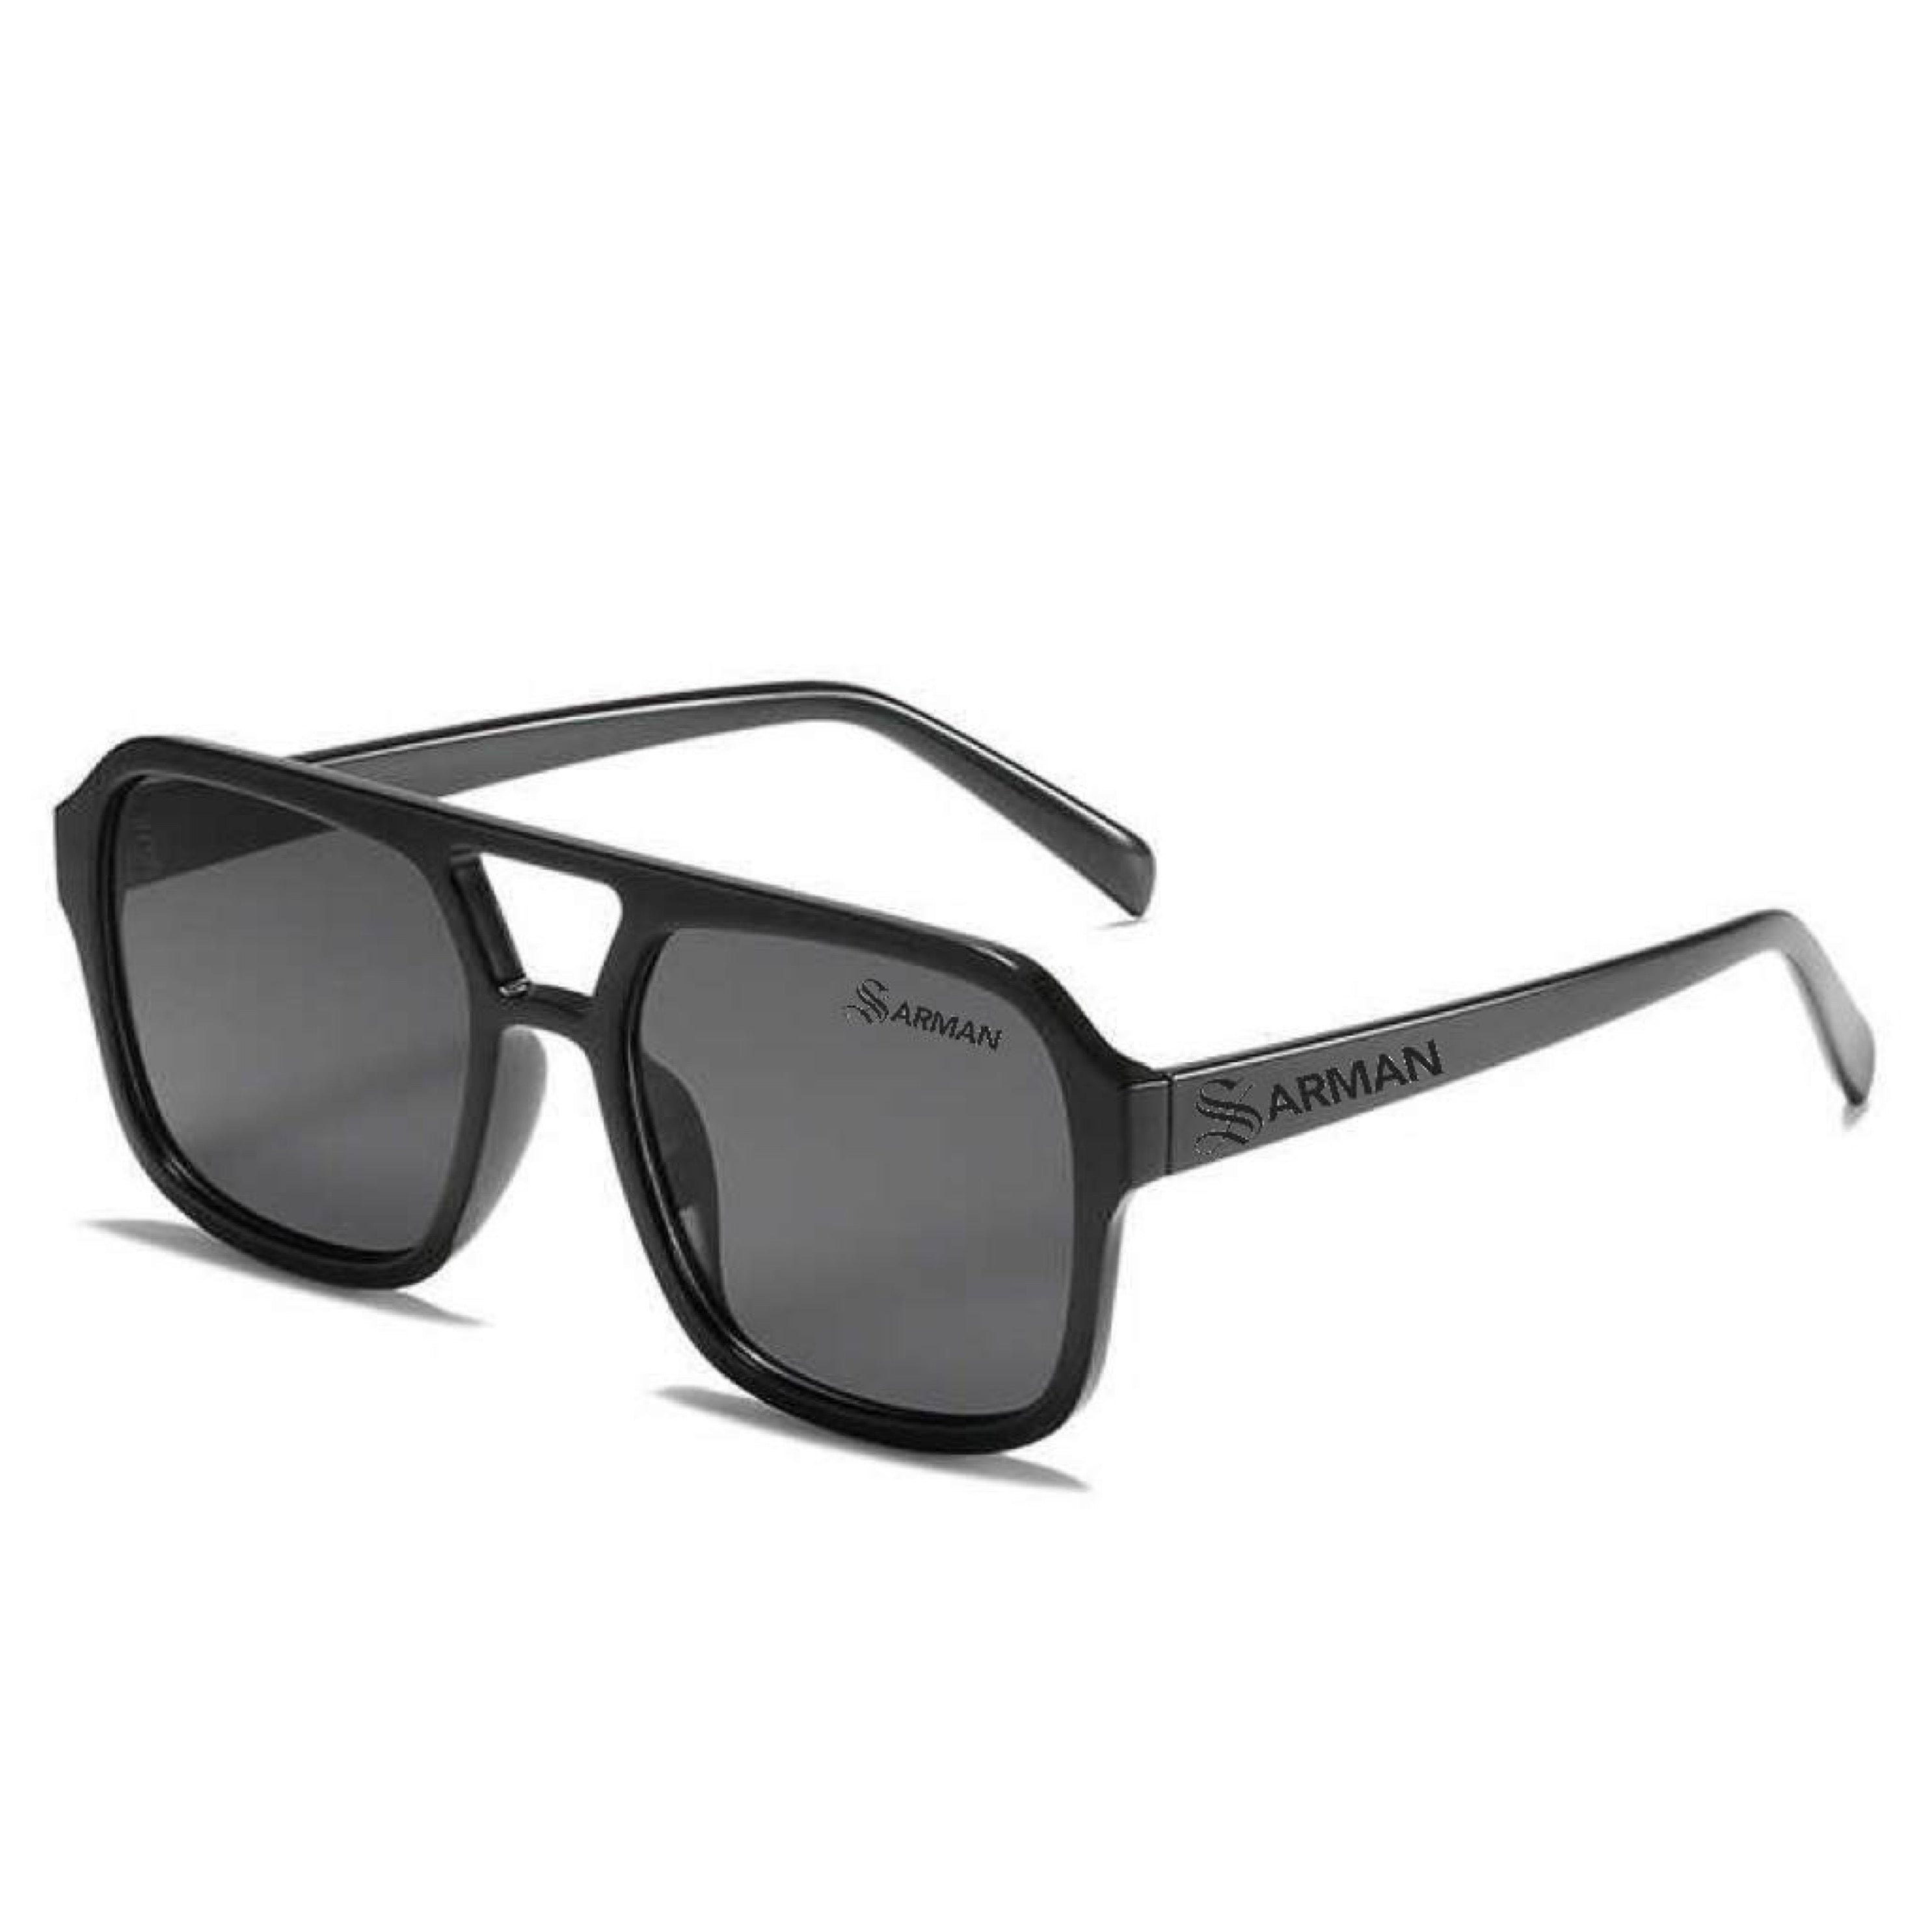 Adam - Unisex Sunglasses (PRE-ORDER DISPATCH DATE 14 JULY 2023) - Sarman Fashion - Wholesale Clothing Fashion Brand for Men from Canada